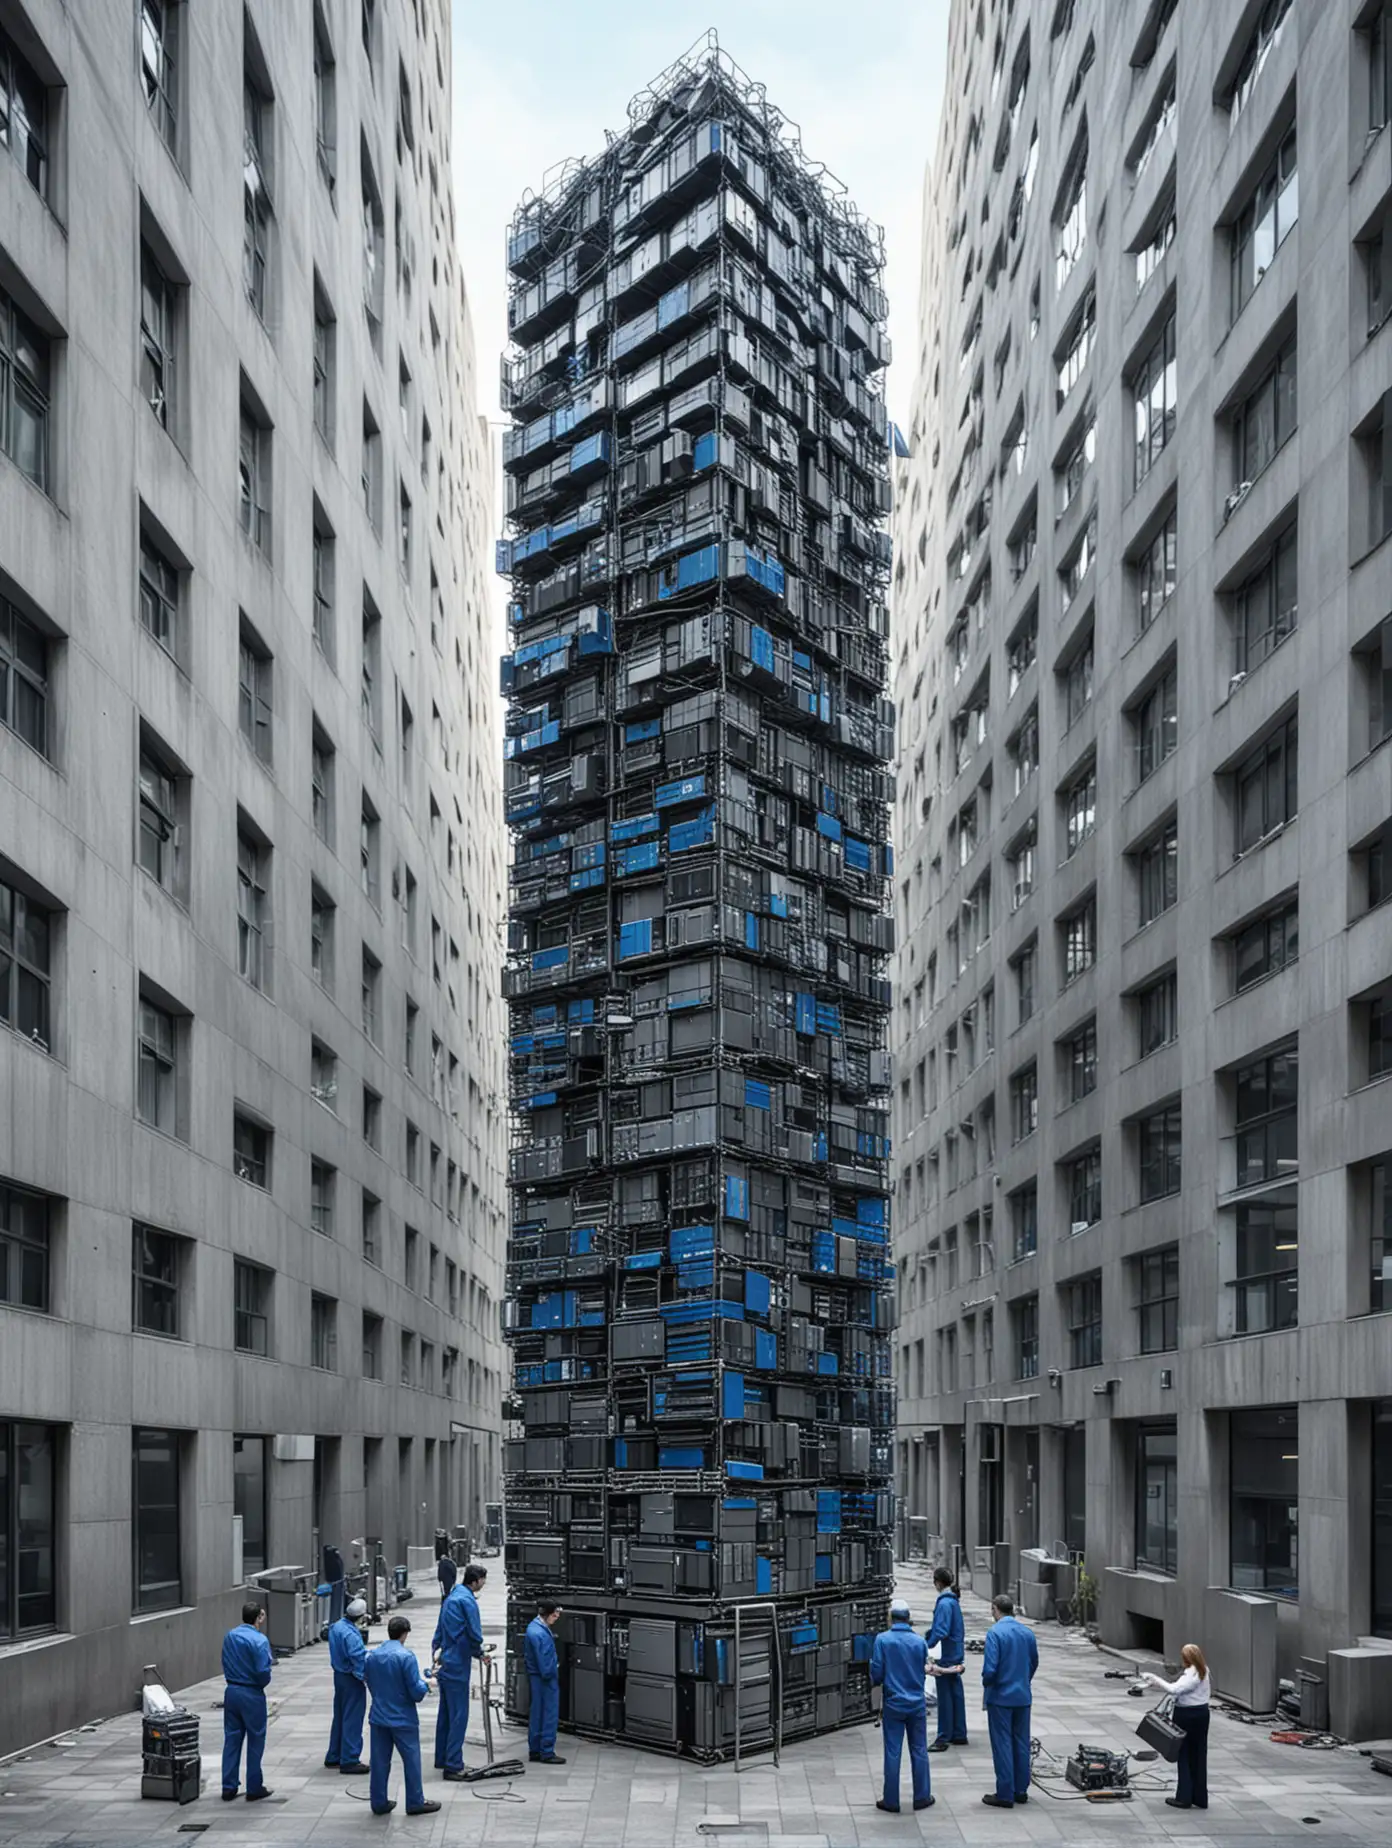 Men in Blue Work Clothes Secure Stacked Tower of Old Computers in Surreal Office Courtyard